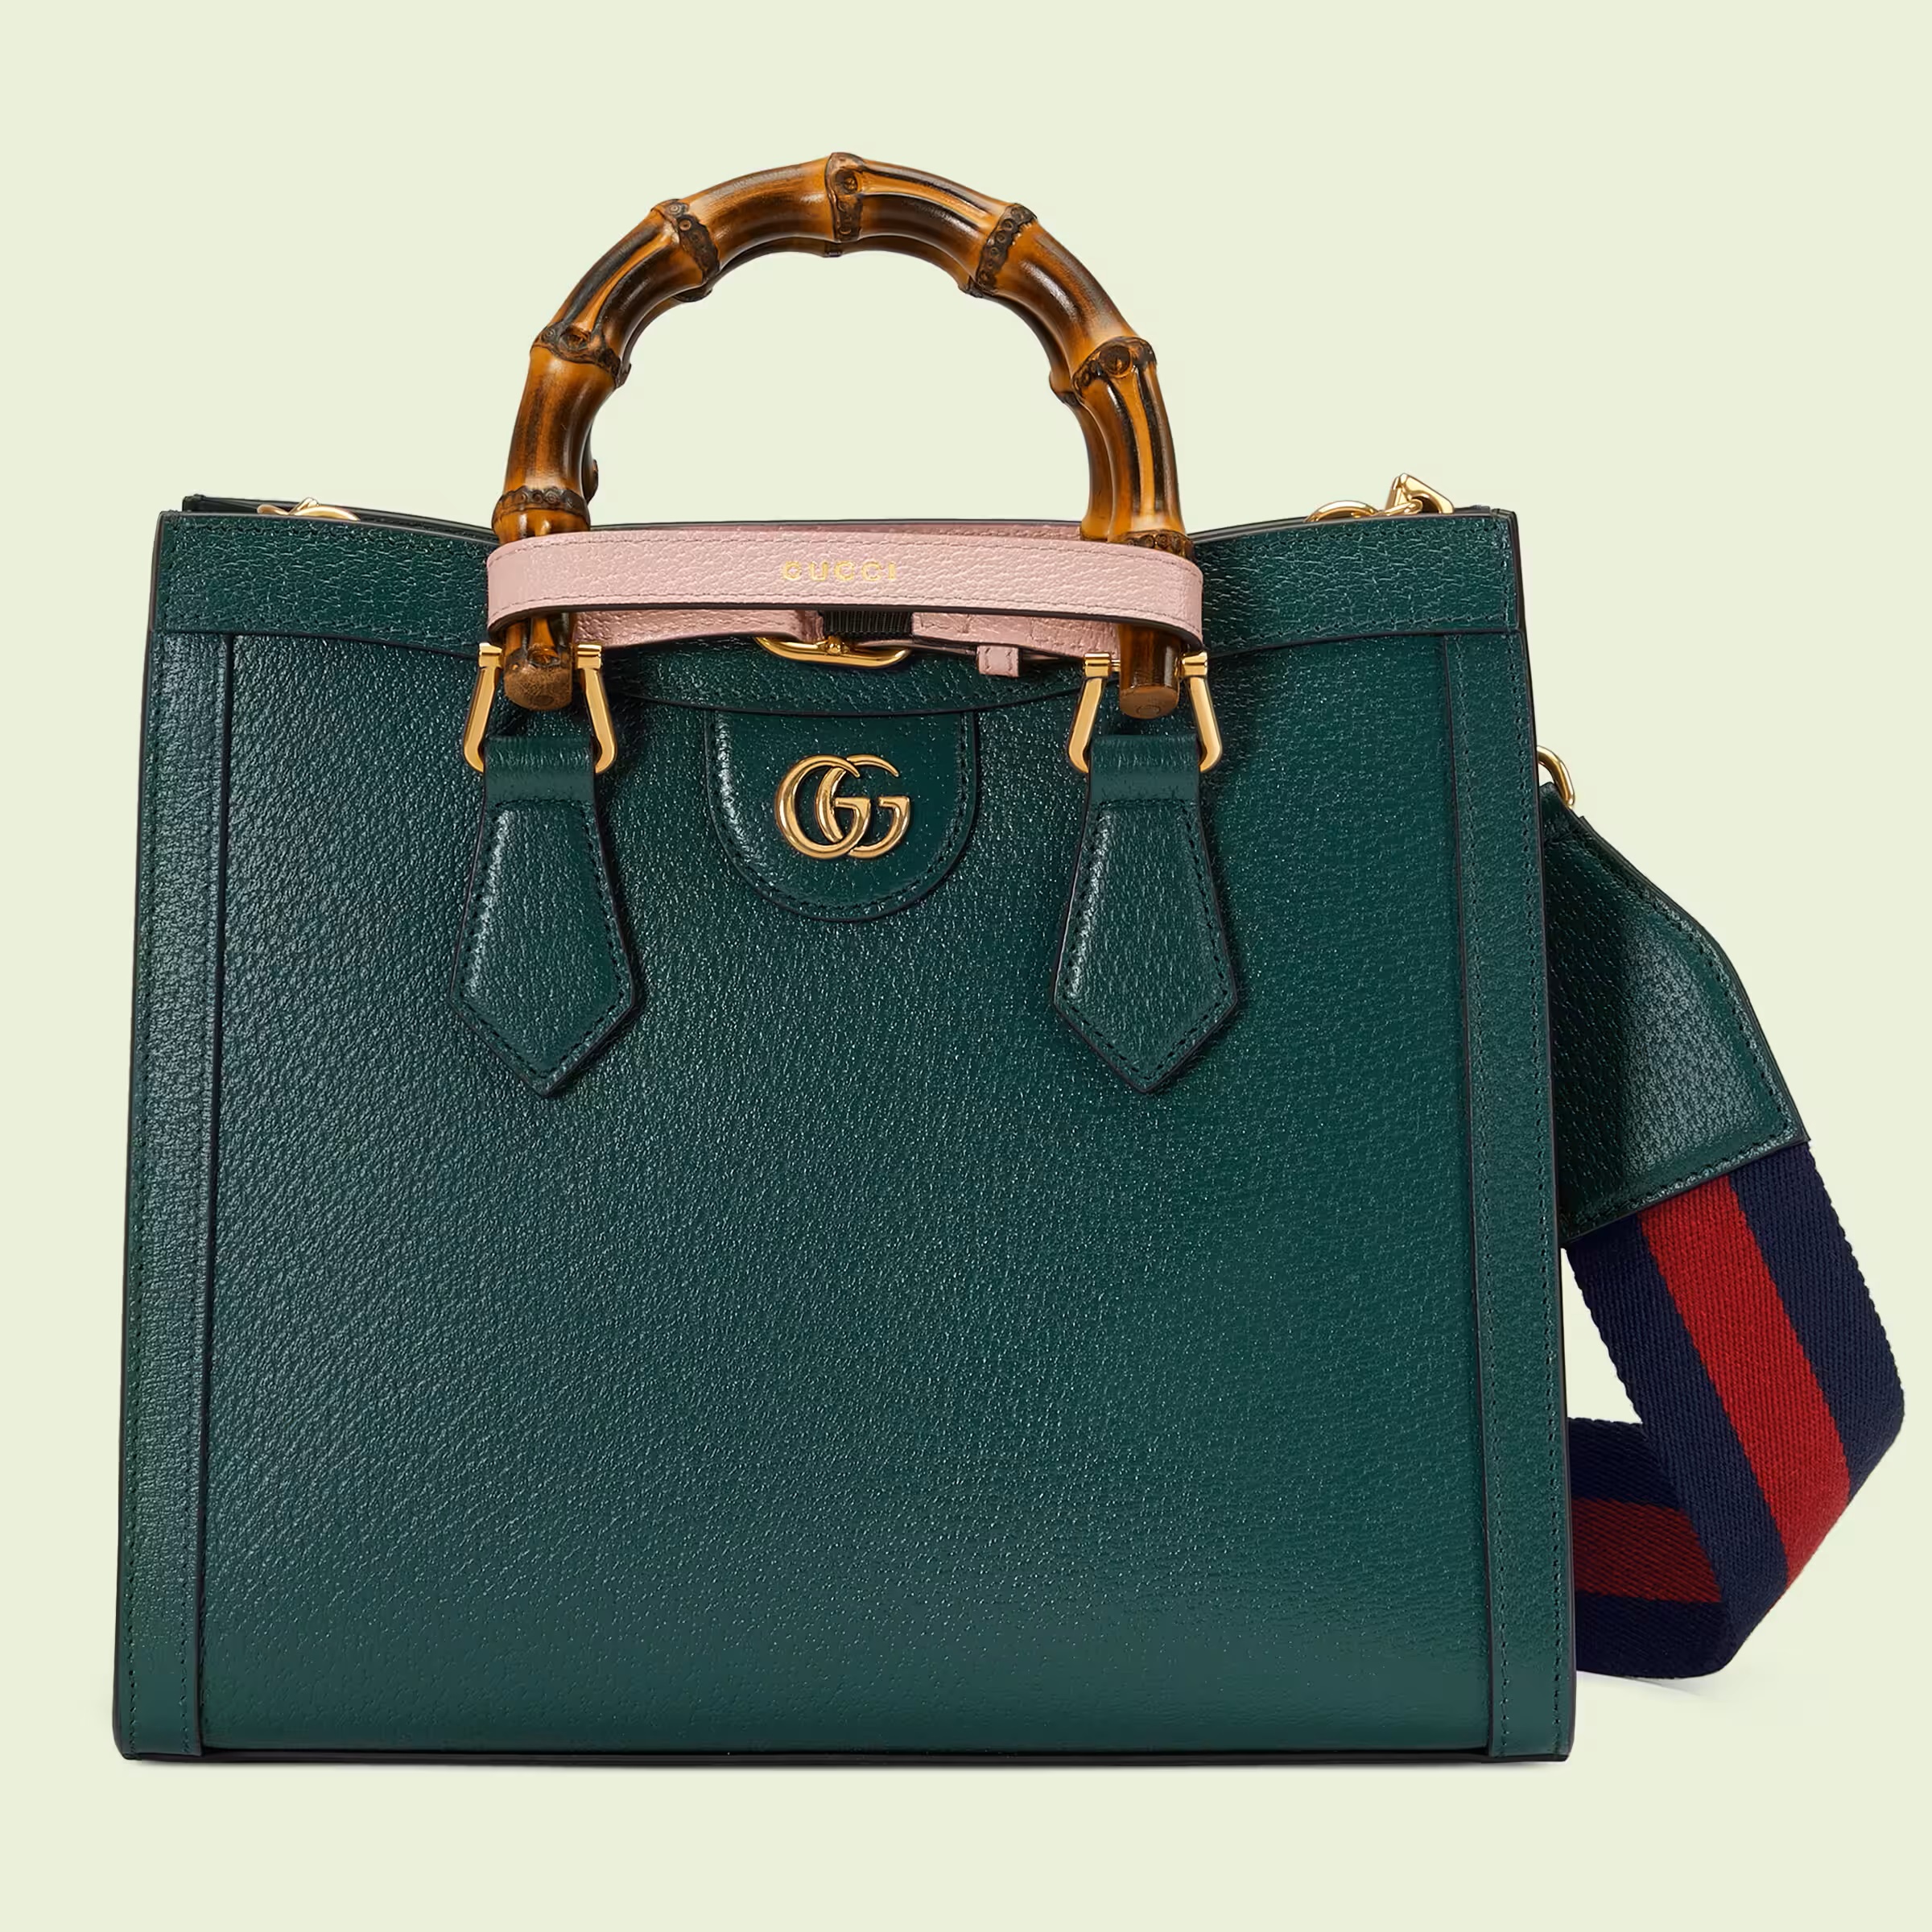 5 Expensive Luxury Handbags And Their Affordable Inspired Versions | PoPxo